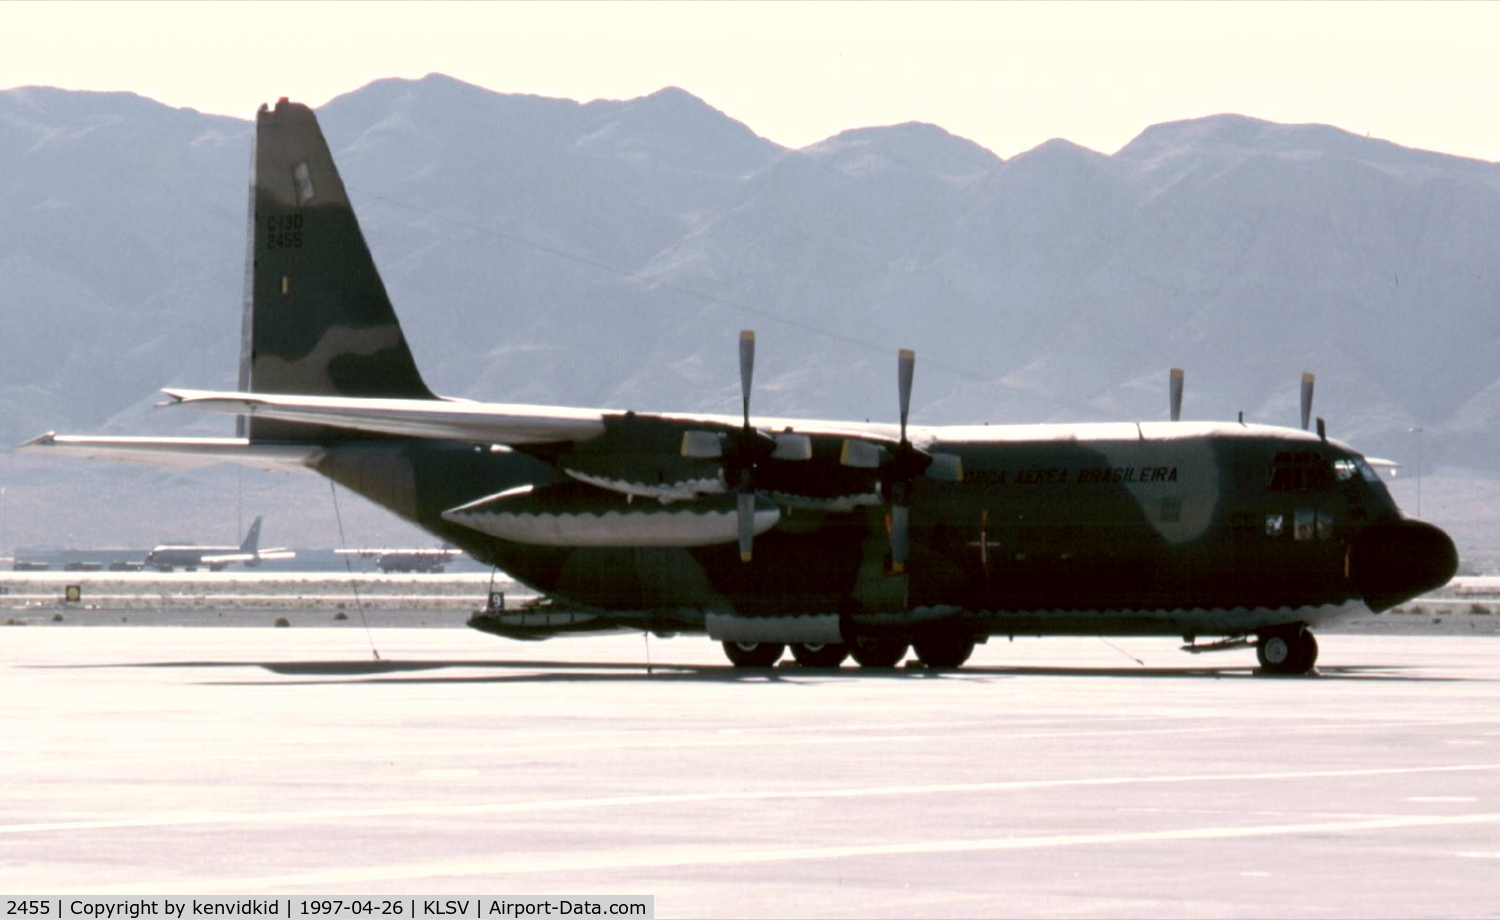 2455, 1967 Lockheed C-130E Hercules C/N 382-4202, At the 1997 50th Anniversary of the USAF air display, Nellis AFB.